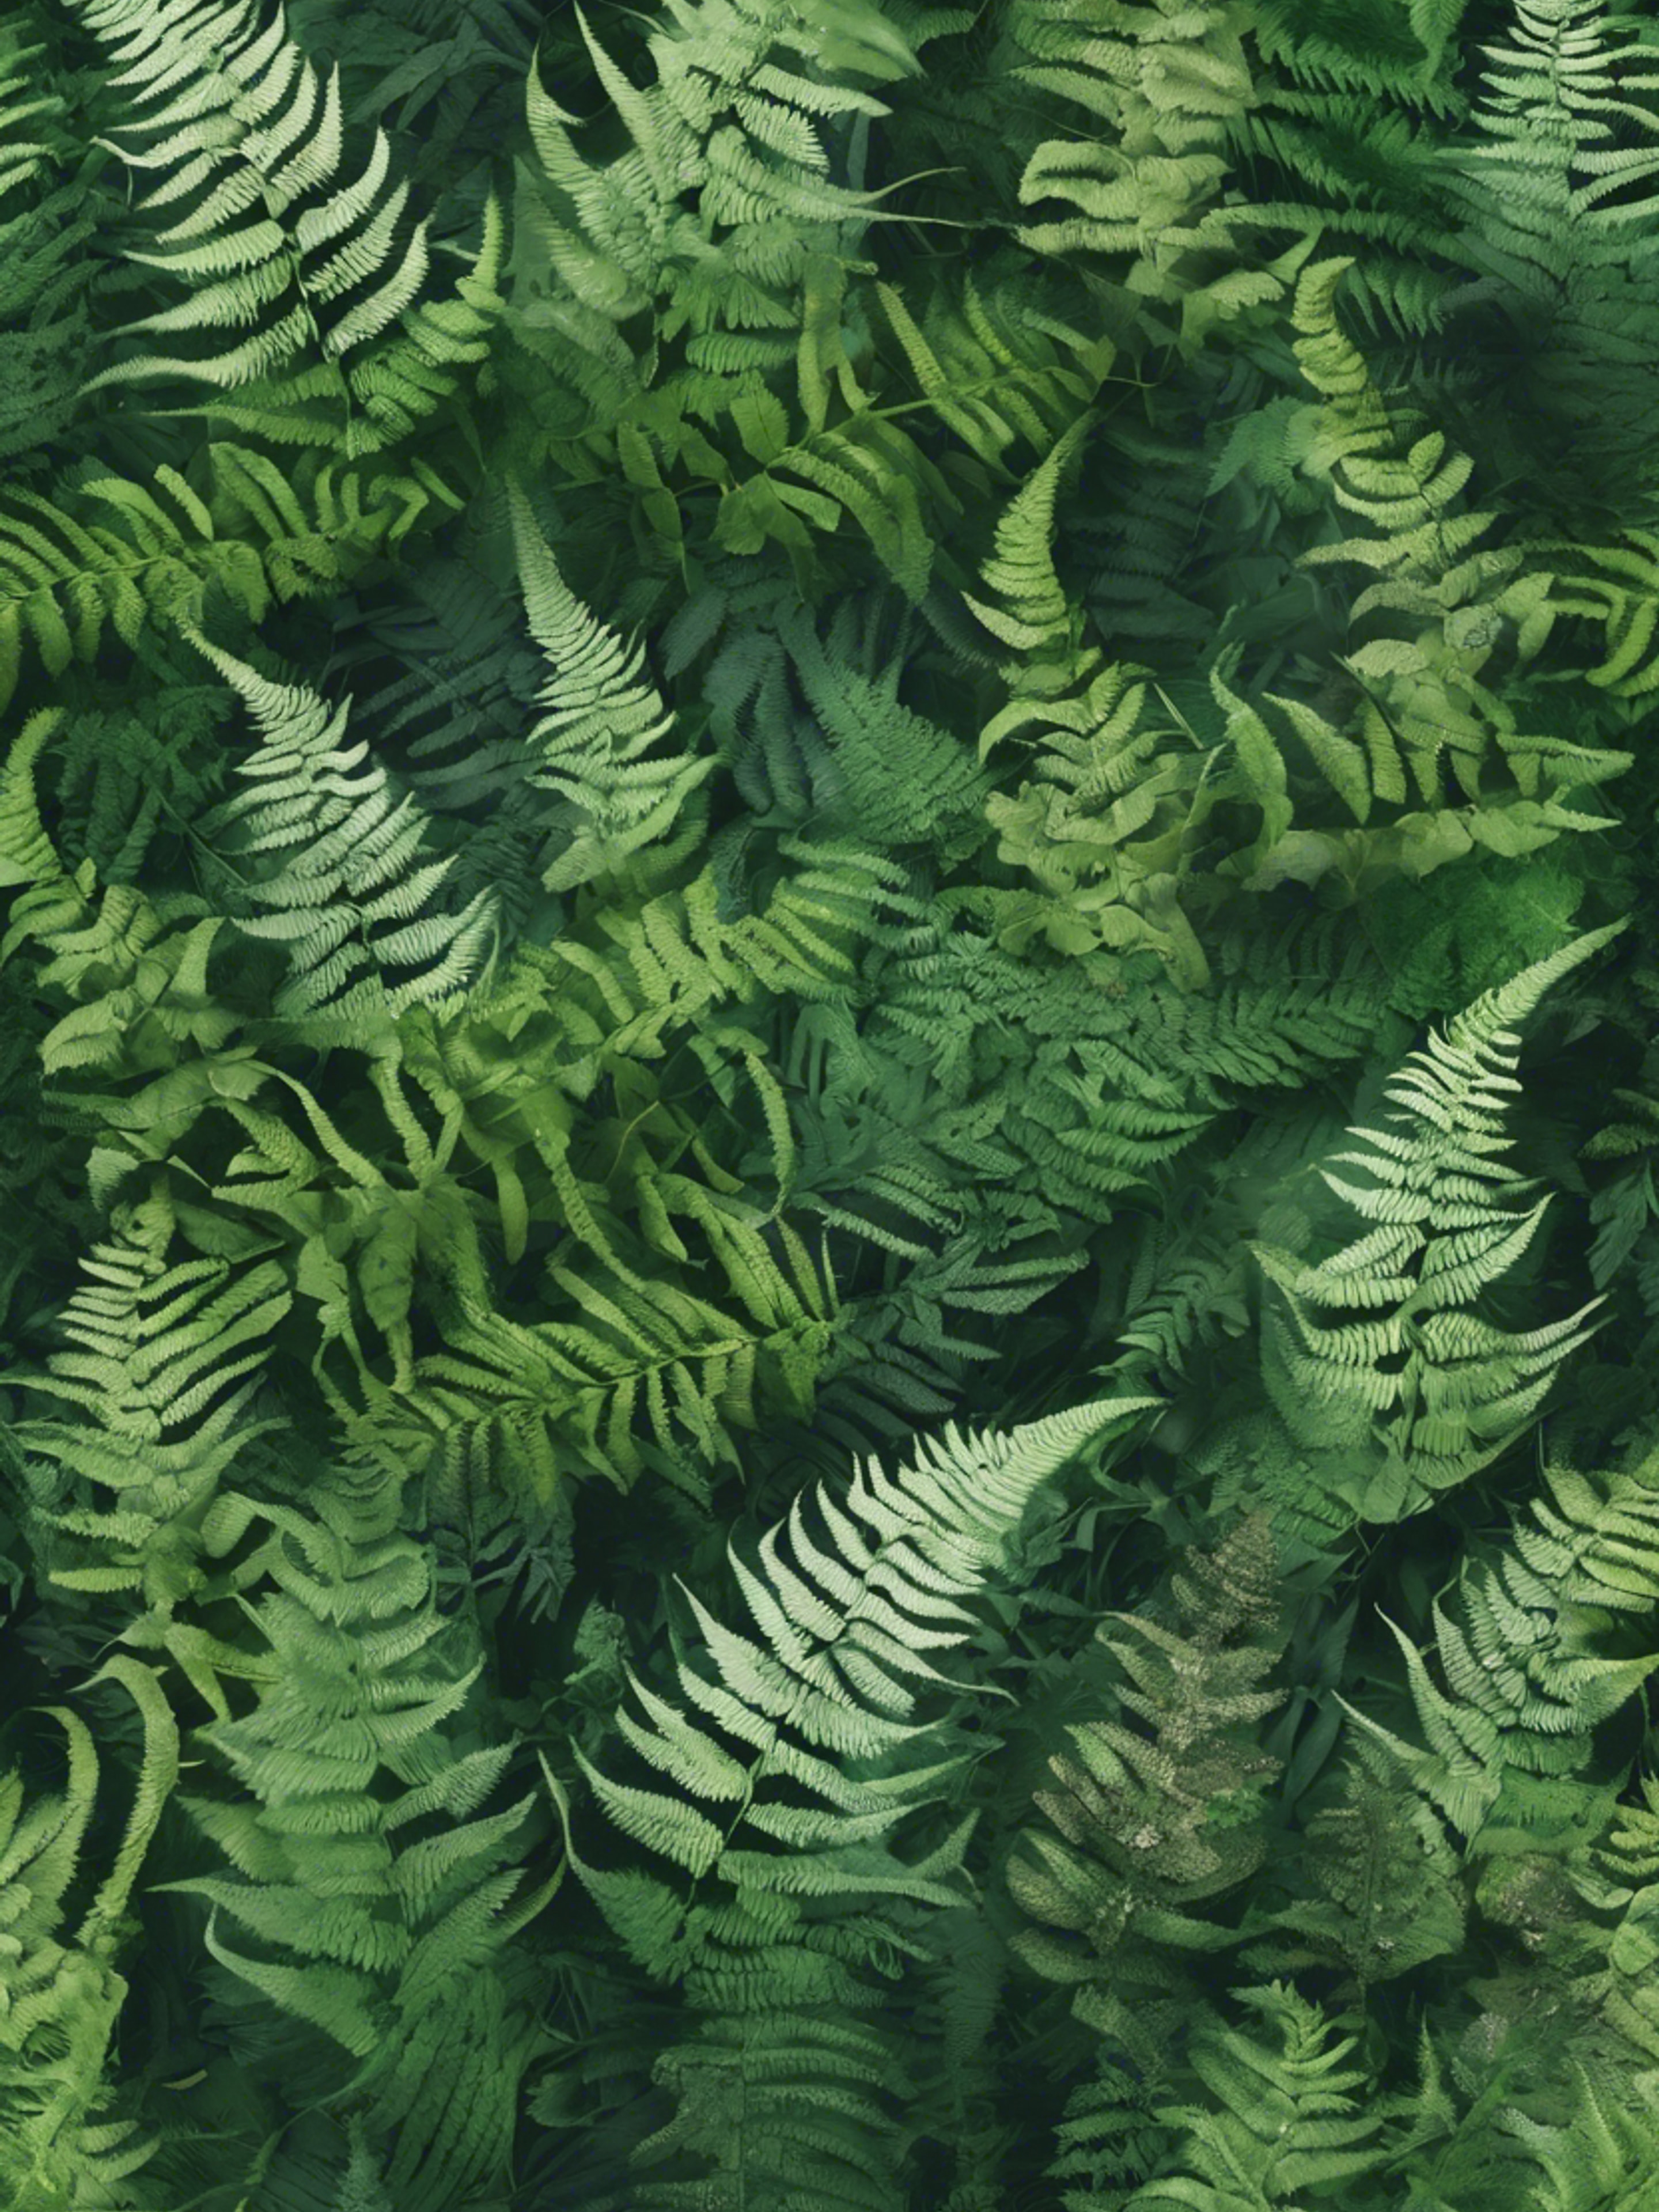 Collage of enchanting ferns and floral patterns mixed with various shades of green leaves.壁紙[374d6e06d7af47a99658]